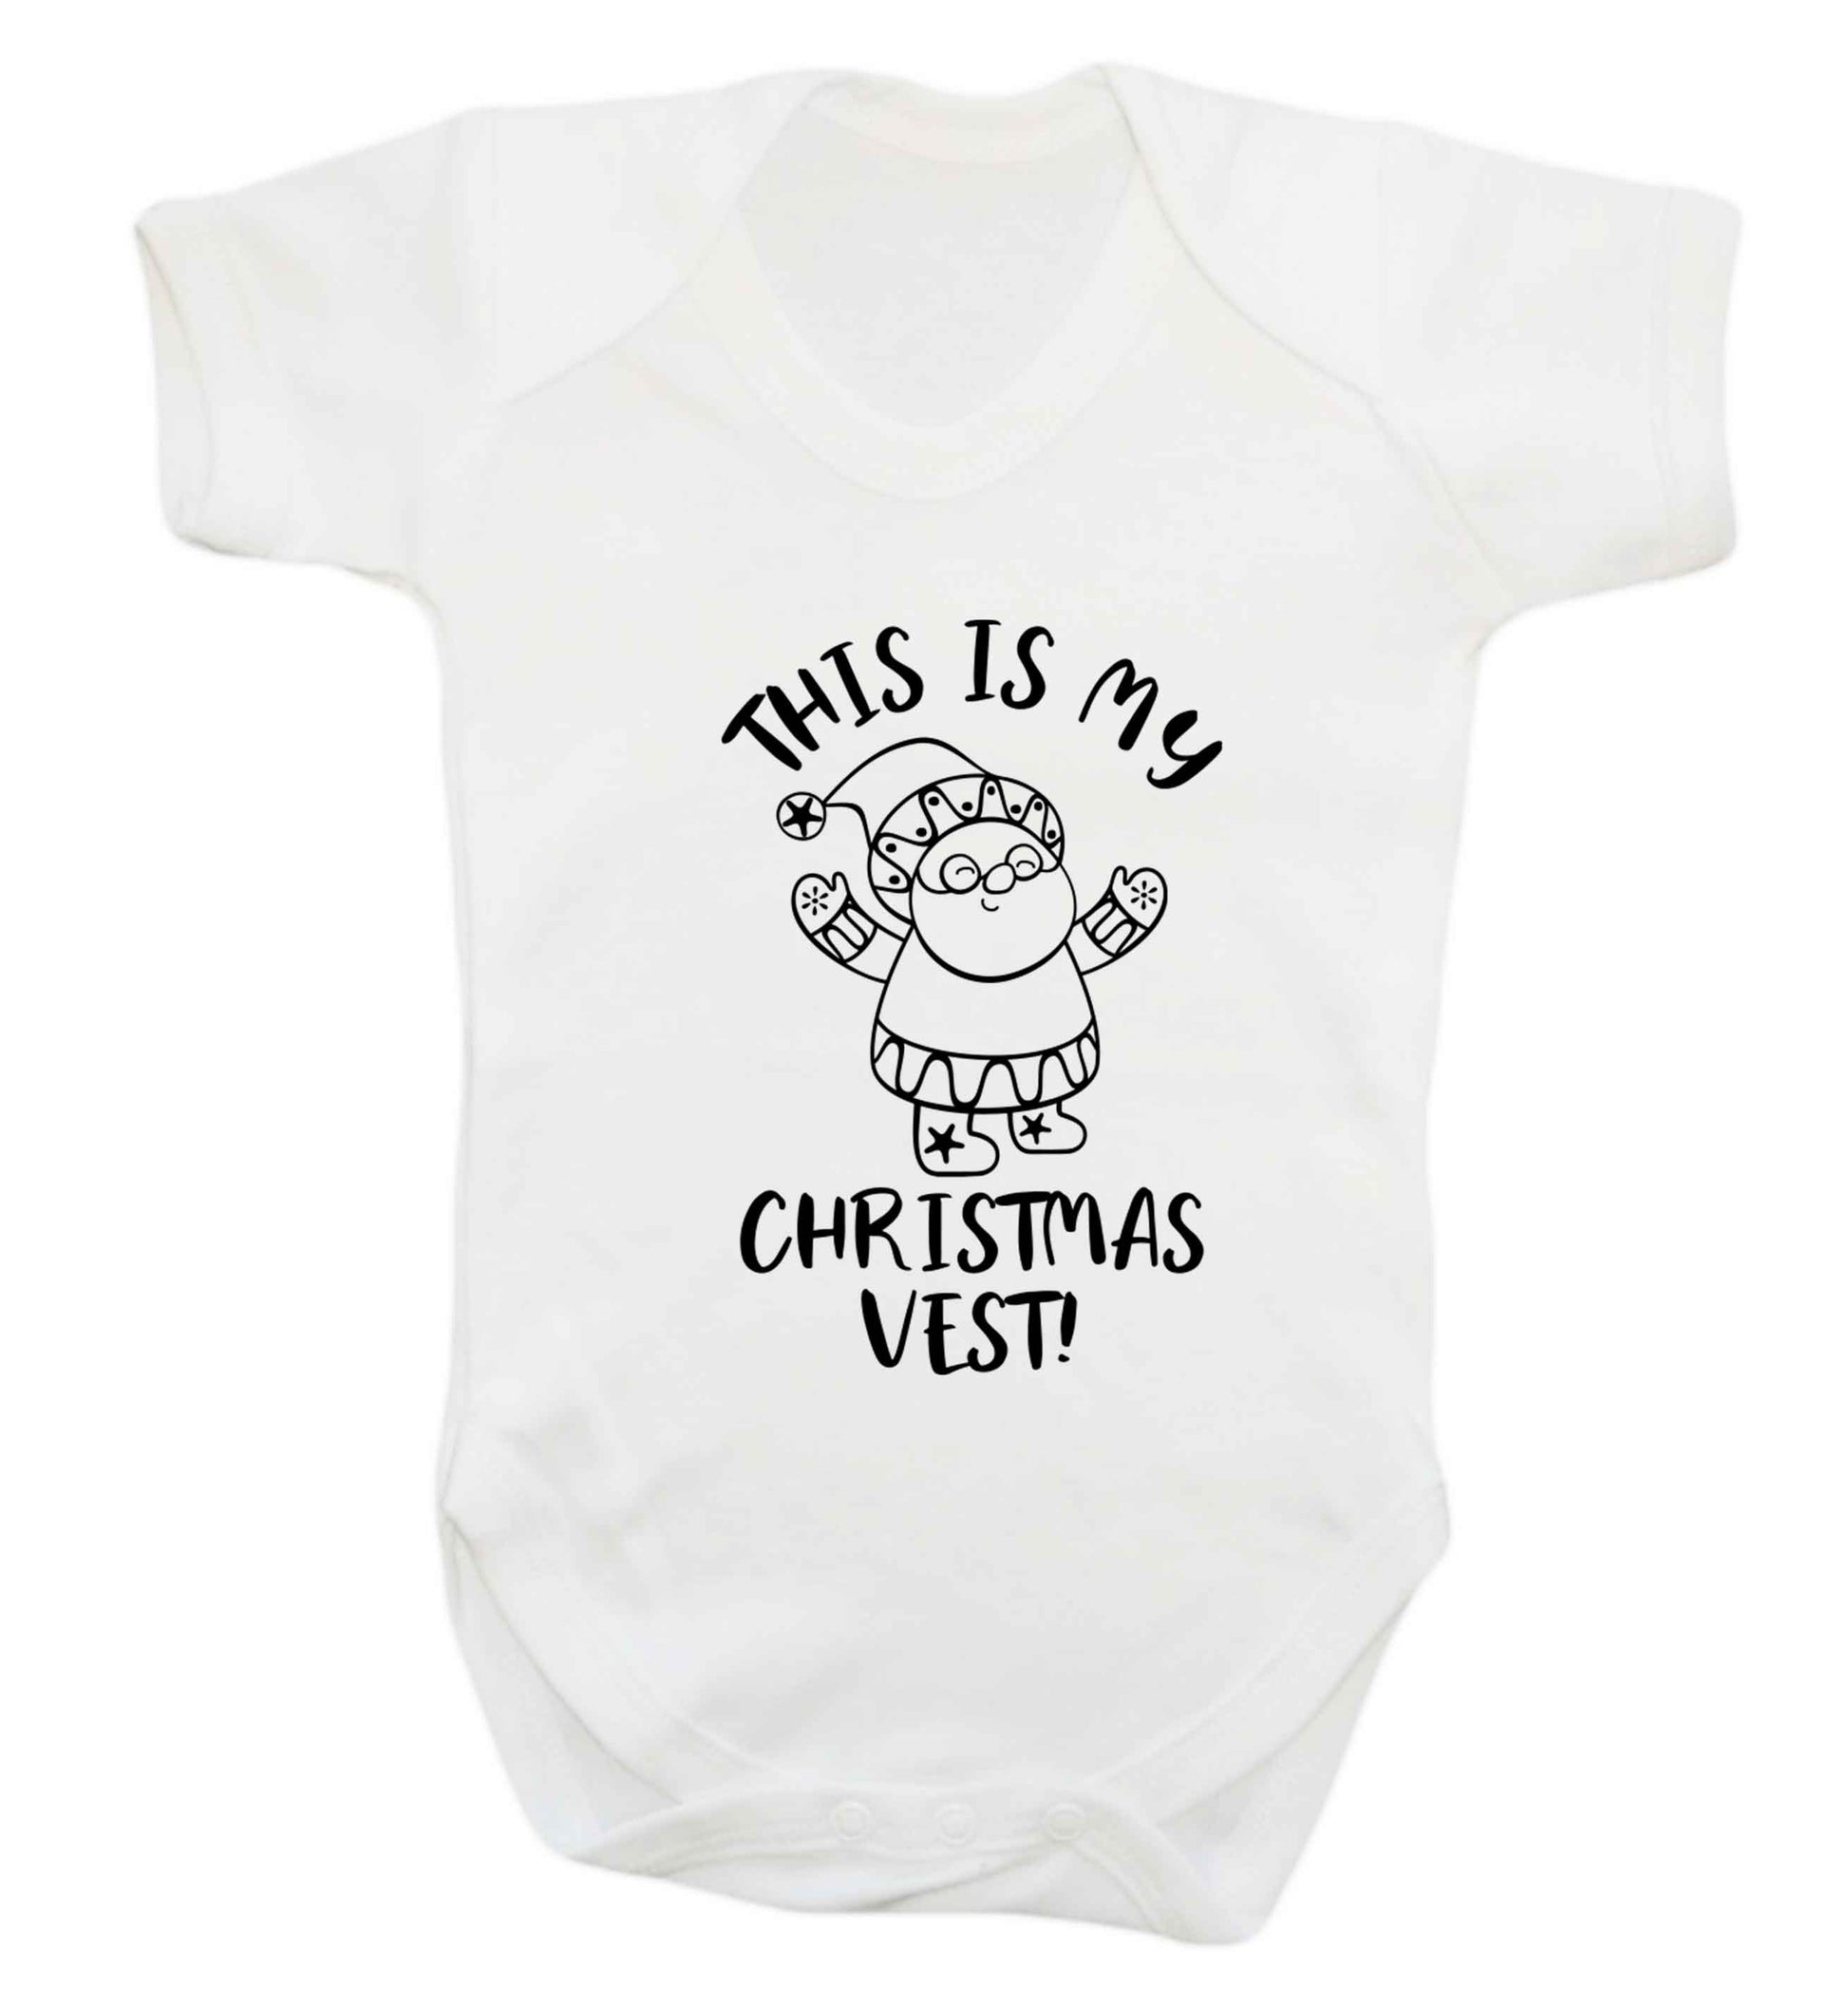 This is my Christmas vest Baby Vest white 18-24 months